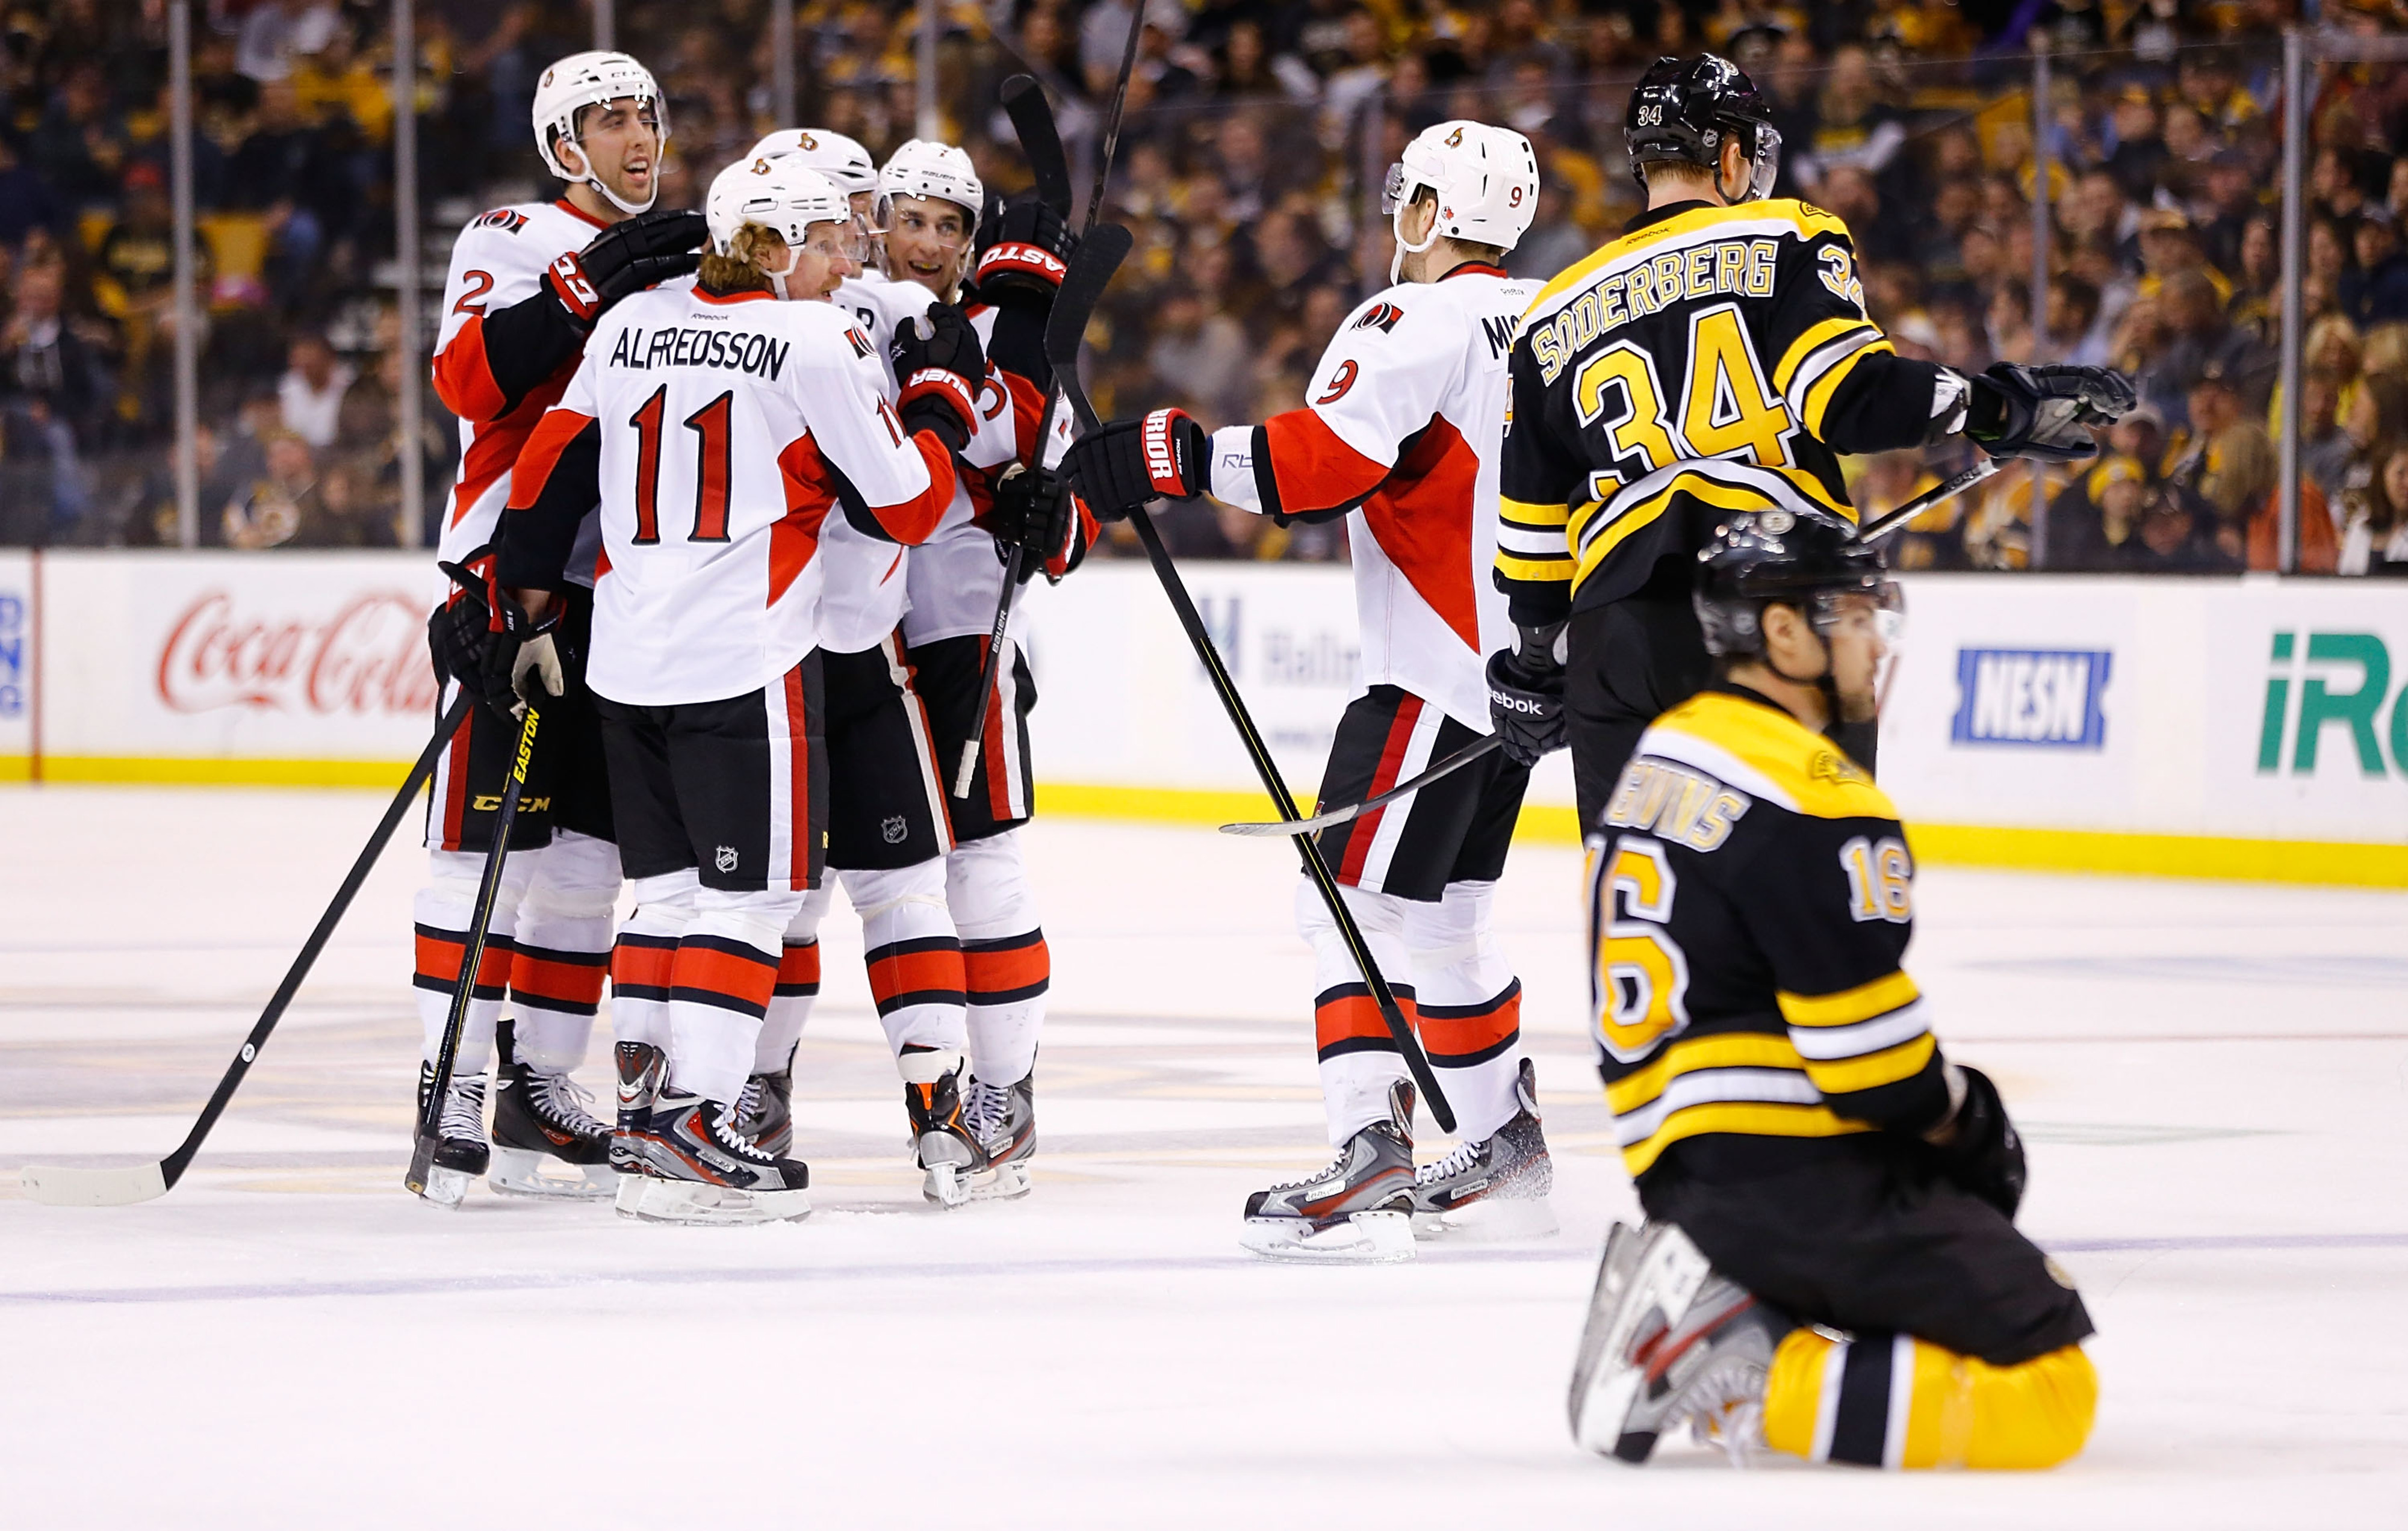 Kaspars Daugavins rests on his haunches in the foreground as the Senators celebrate Jared Cowen's second period goal.